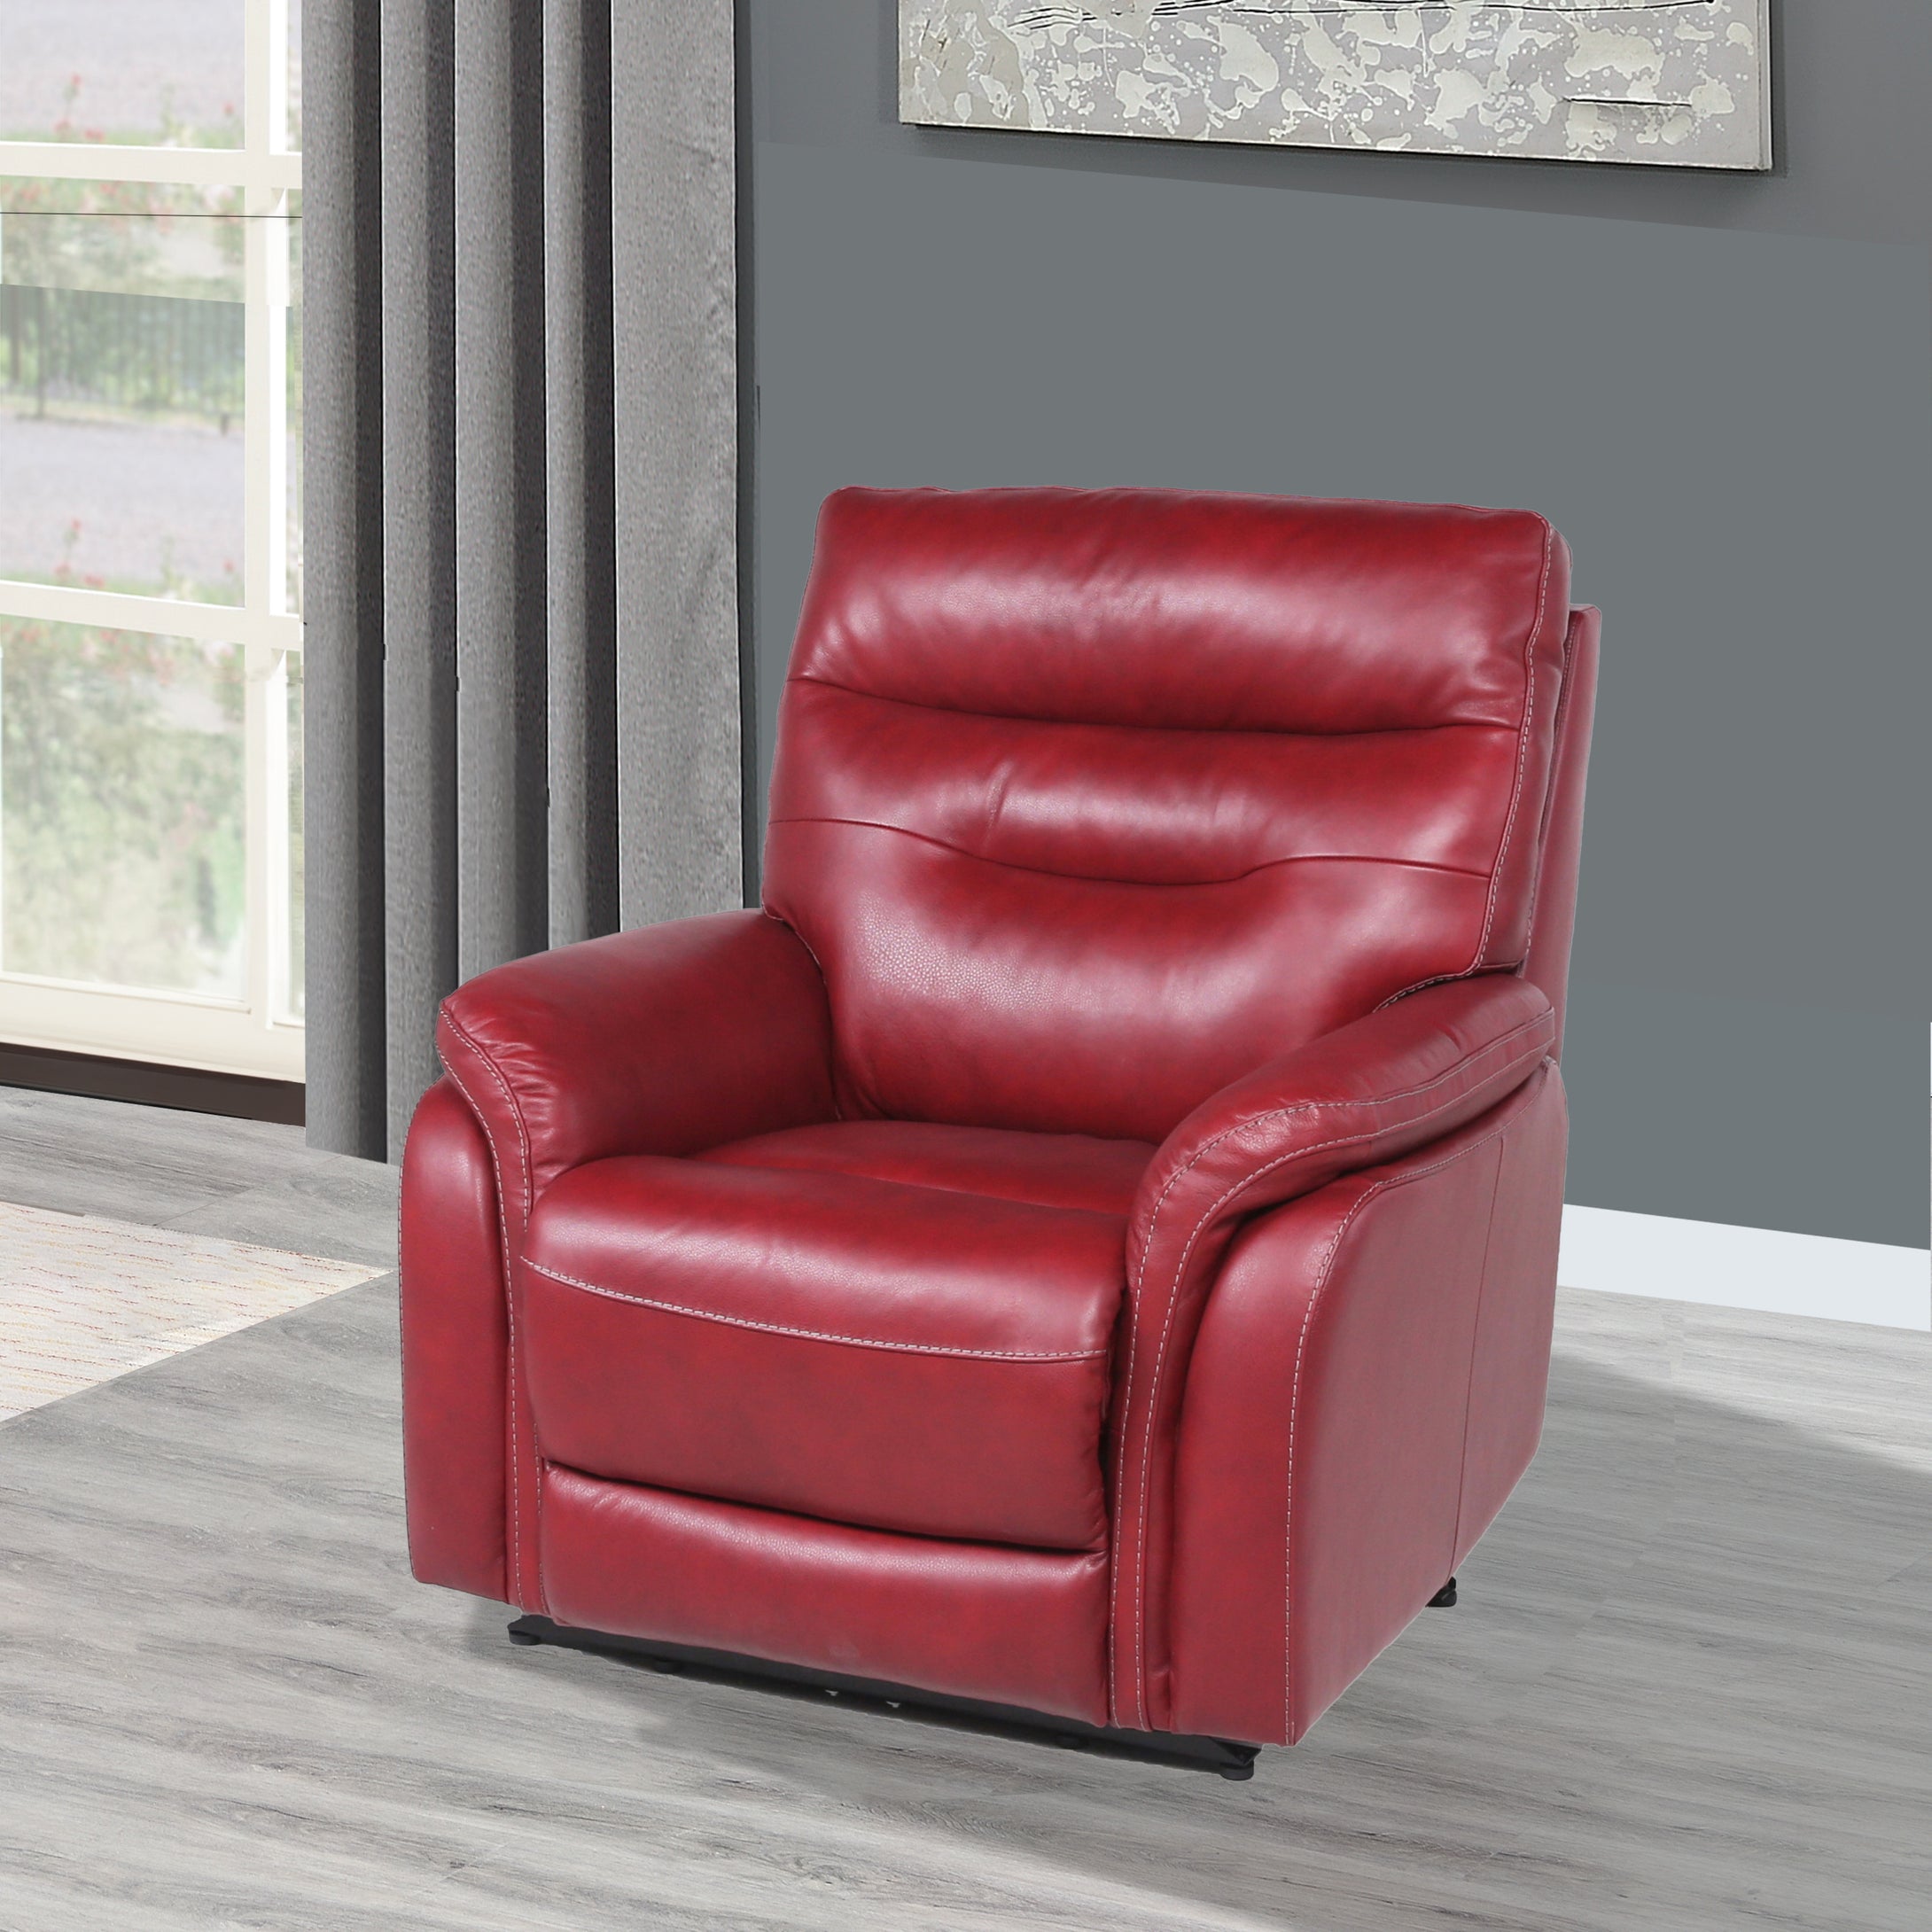 Contemporary Style, Top-Grain Leather Motion Recliner Control Panel, USB Charging, Home Button, Wine or Coffee Color